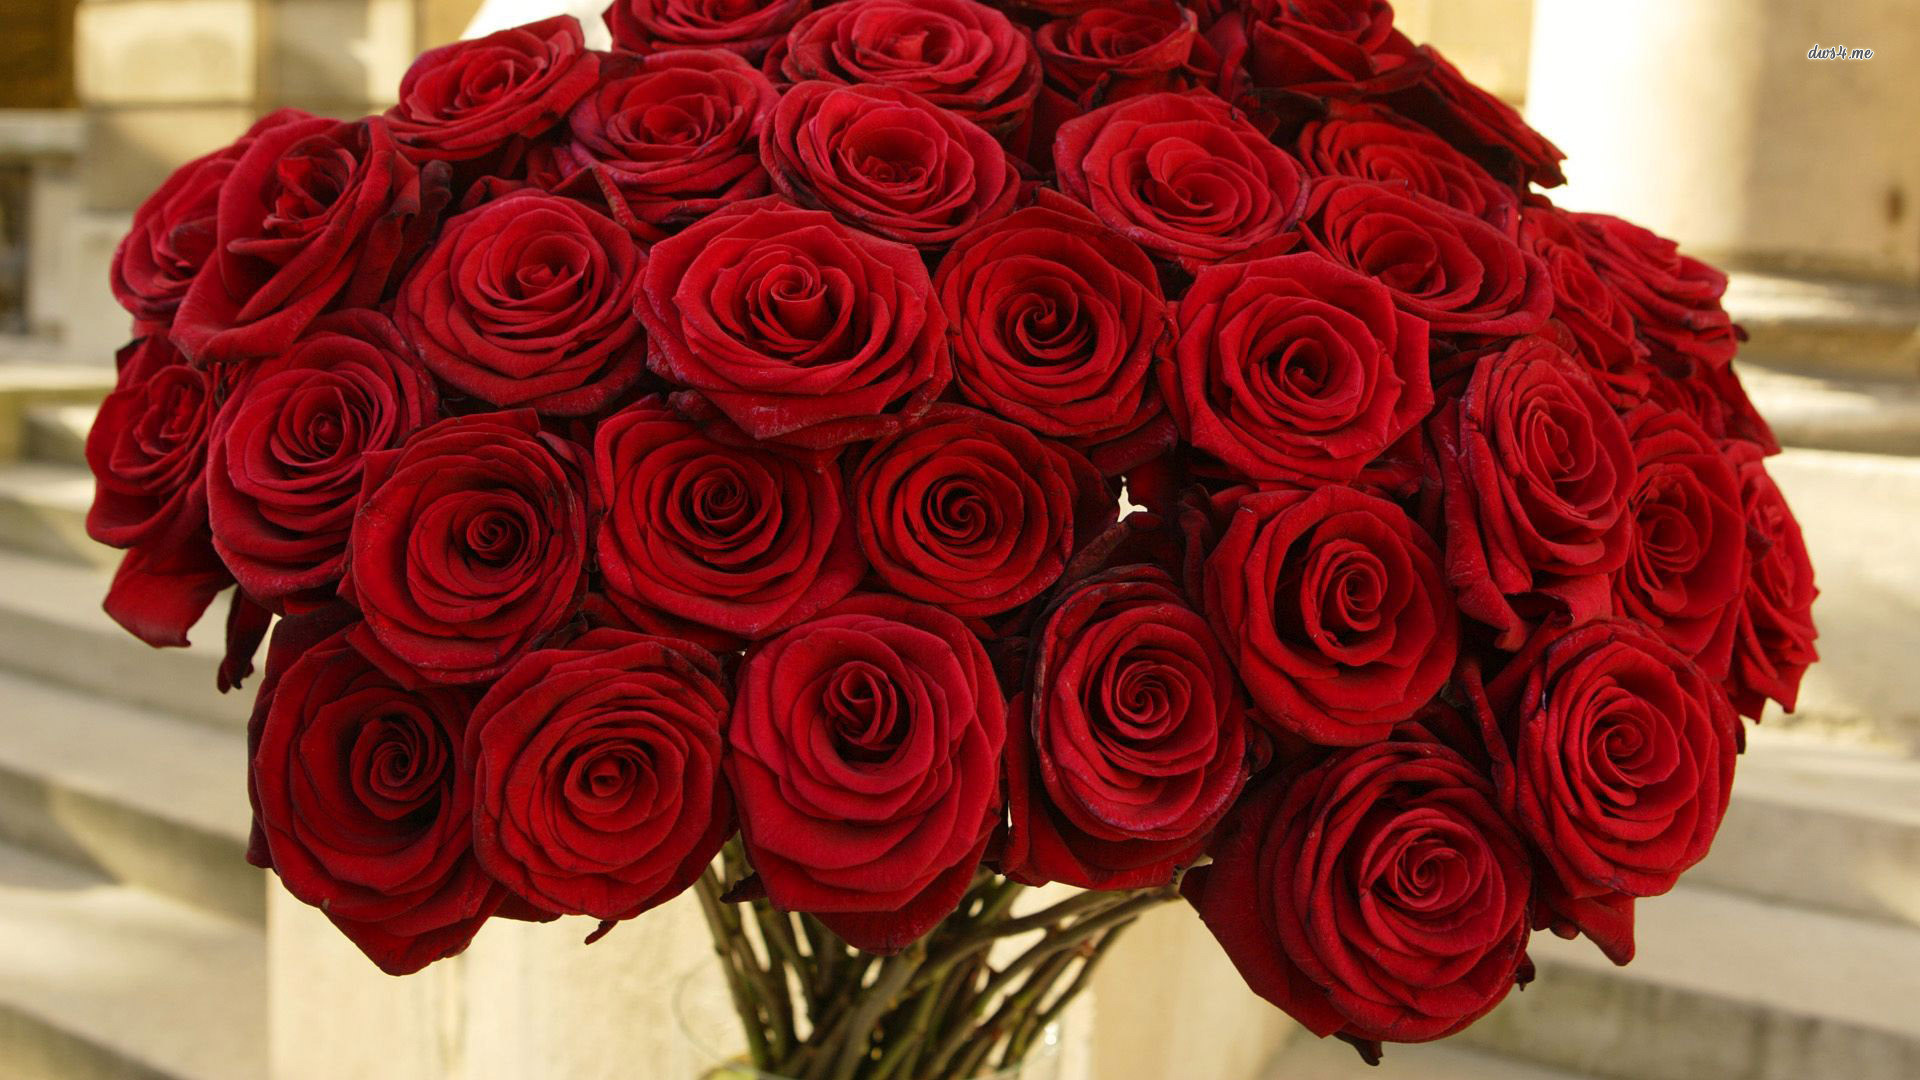 1920x1080 Red Roses Wallpapers HD A19